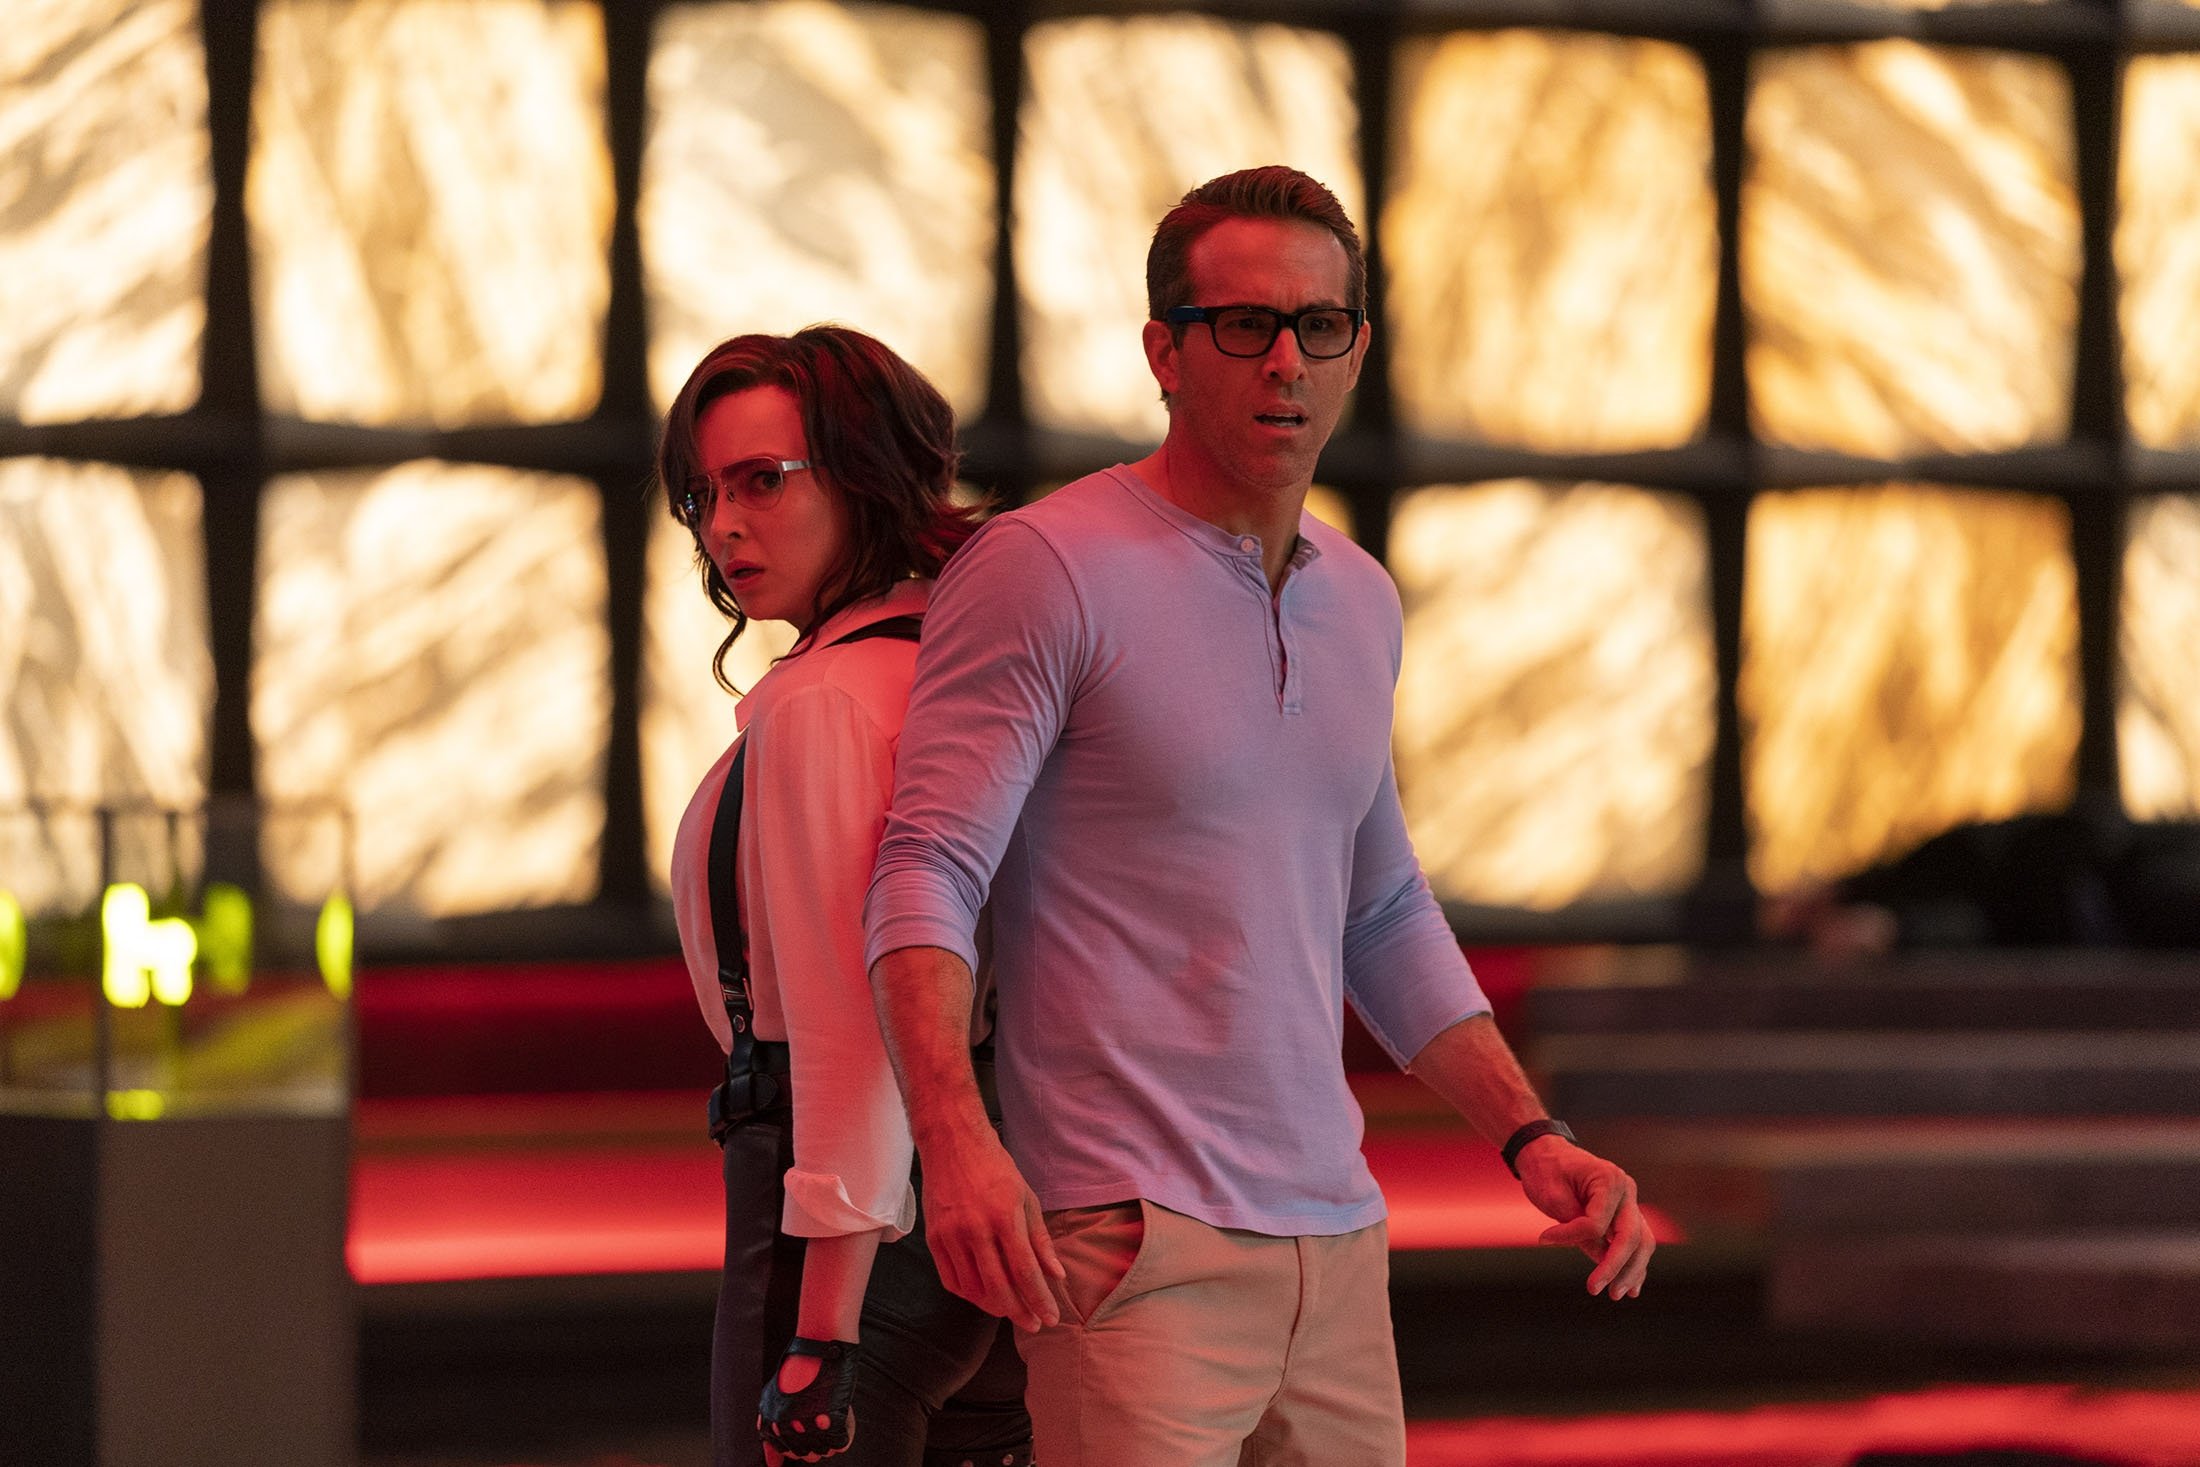 Ryan Reynolds (R) and Jodie Comer stand together in a scene from the film "Free Guy." (20th Century Studios via AP)